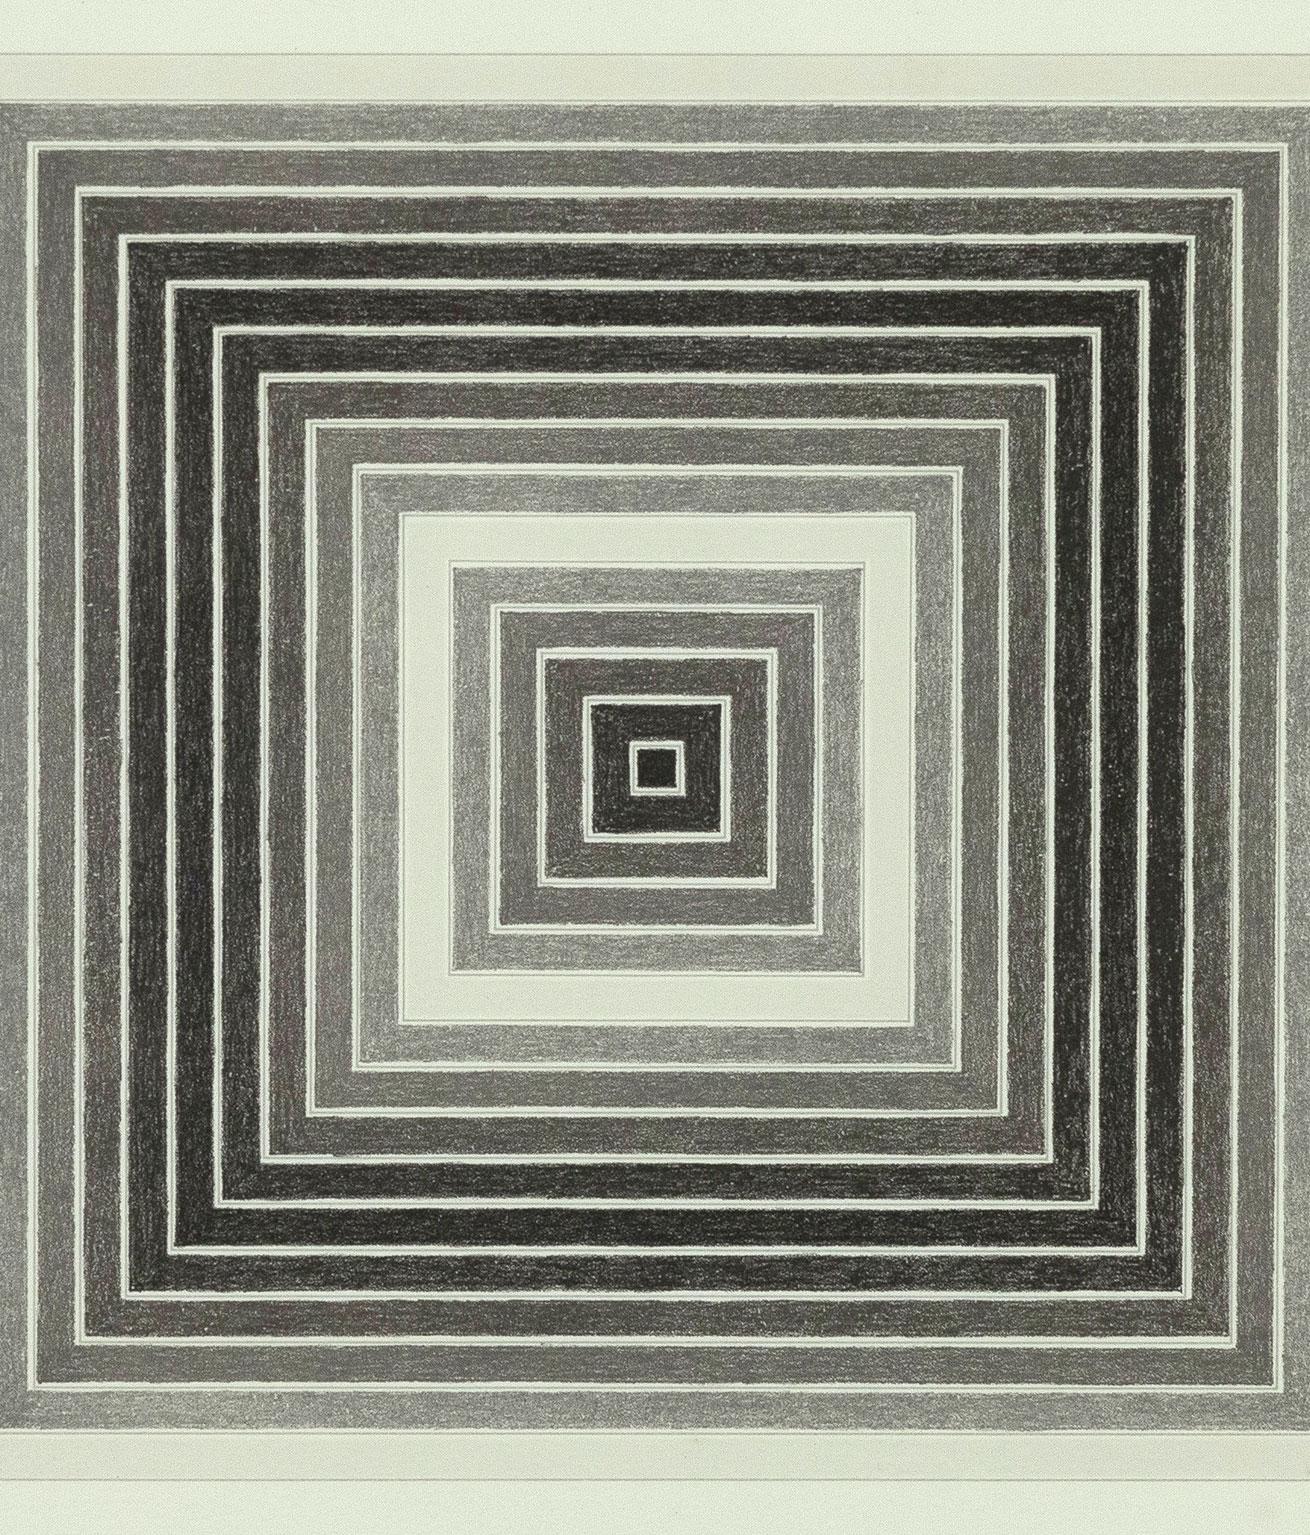 Frank Stella's oeuvre encapsulates many of the key developments in post-war American art; notably the rejection of abstract expressionism and the introduction of hard-edge abstraction, Op art and Minimalism.

Stella was one of the first artists who